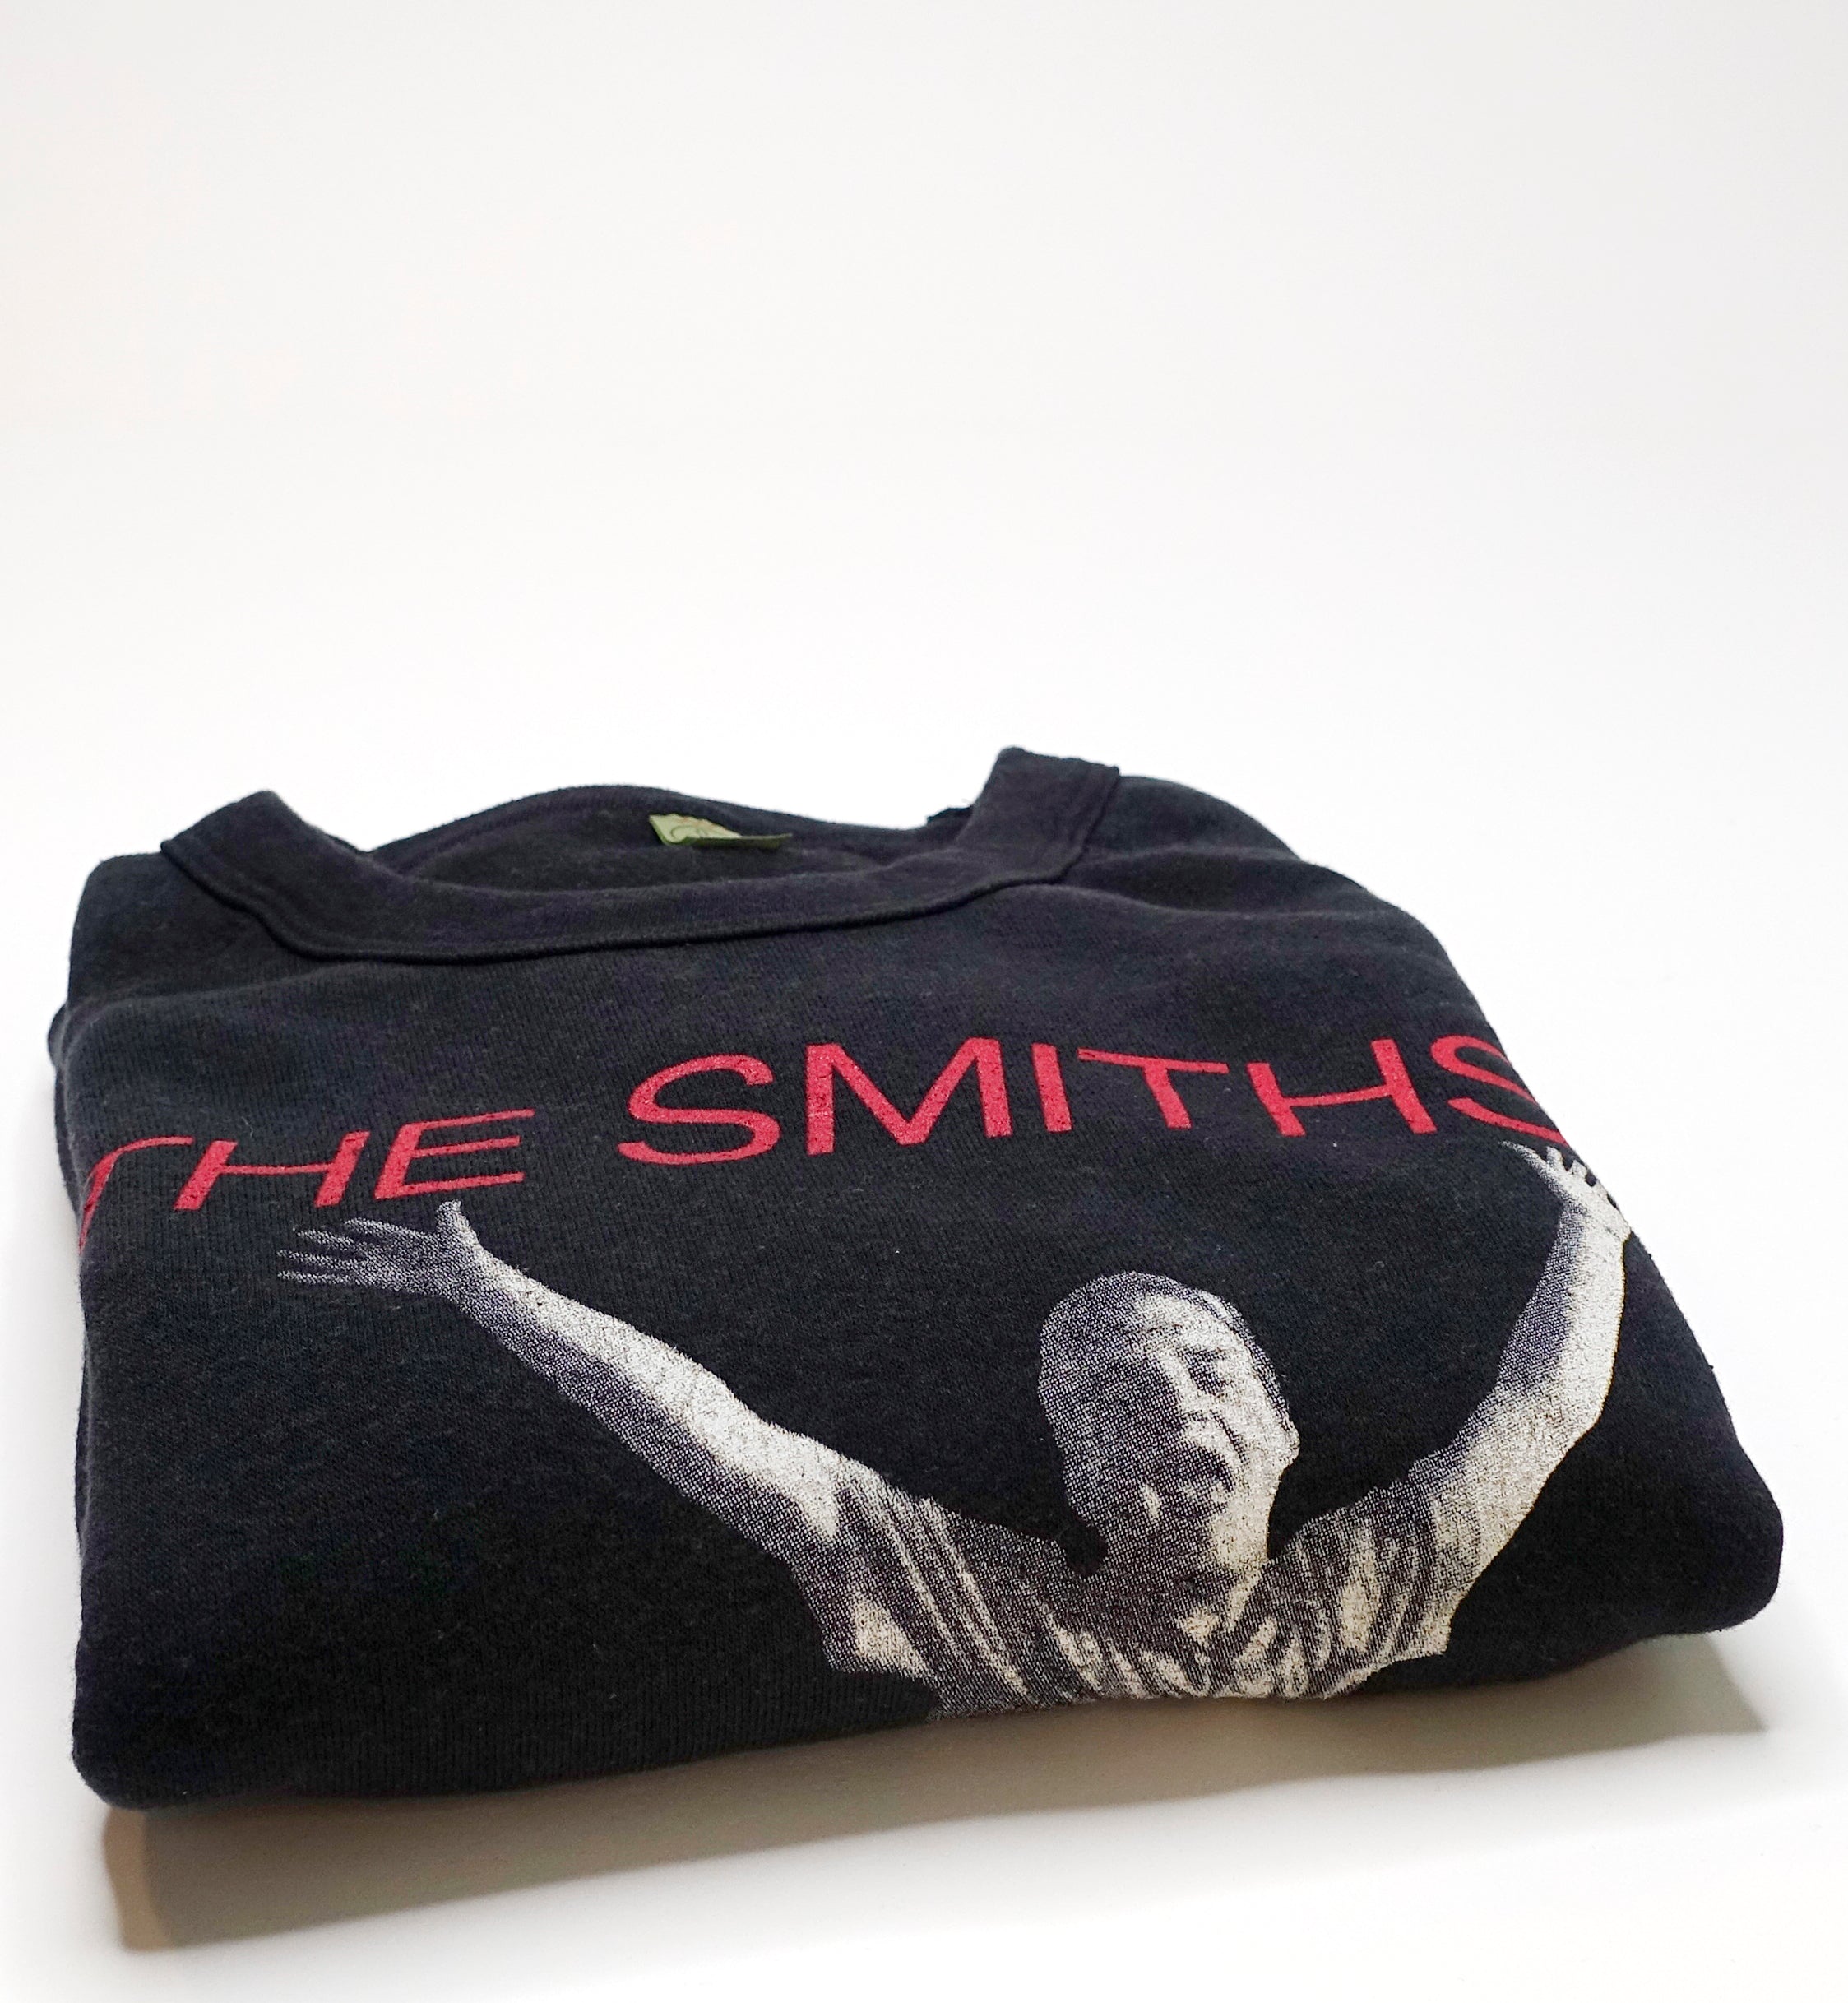 the Smiths - The Boy With The Thorn in his Side Sweat Shirt (Bootleg by Me) Size XL